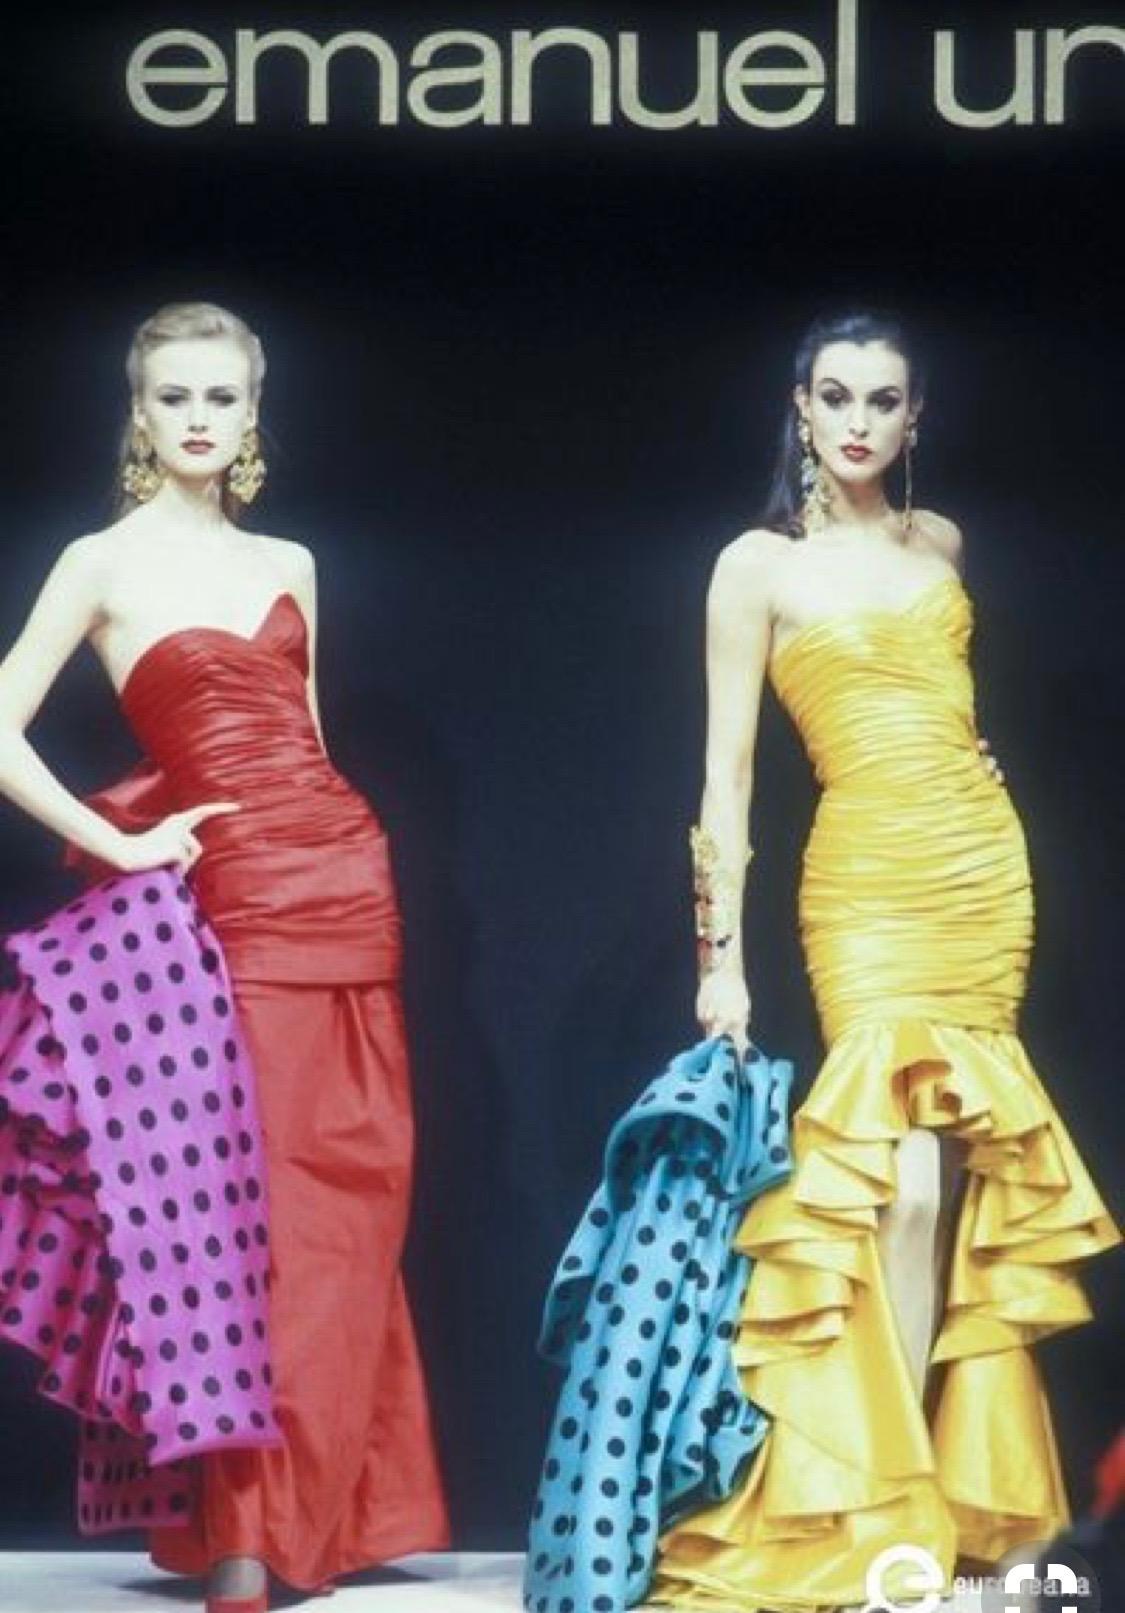 Emanuel Ungaro Numbered Haute Couture Fall 1984 Red  Strapless Evening Dress.
So pretty , from the Autumn 1984 Haute Couture, see runway photo.
Interior boned corset

Bust 34